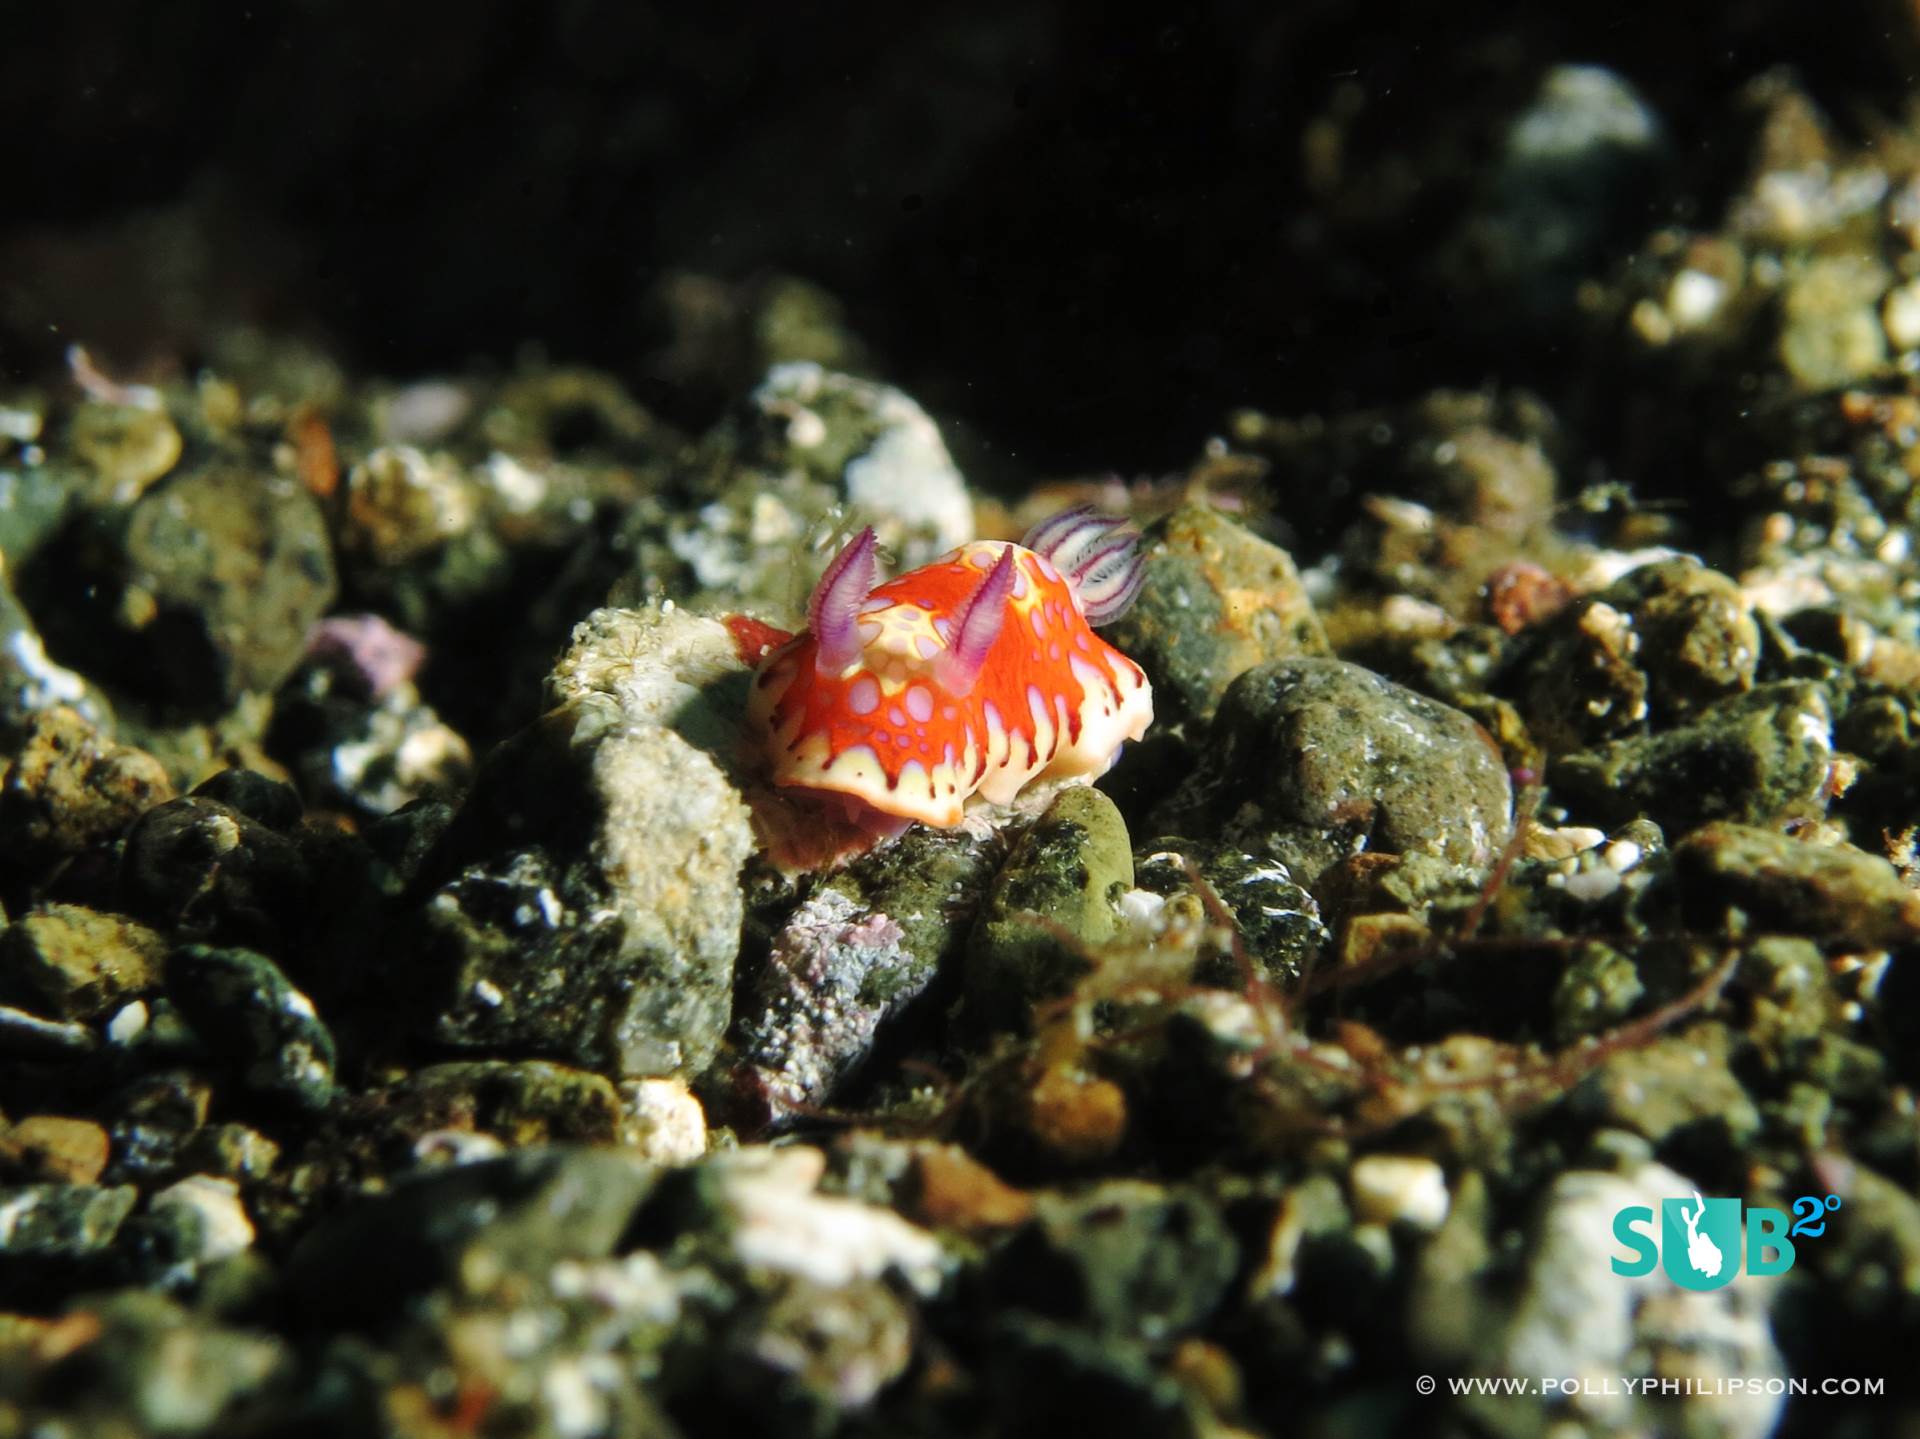 A variety of nudibranchs are waiting to be found in the shallower areas around Speyside. We recorded new depth ratings for many species, like this harlequin blue sea goddess.